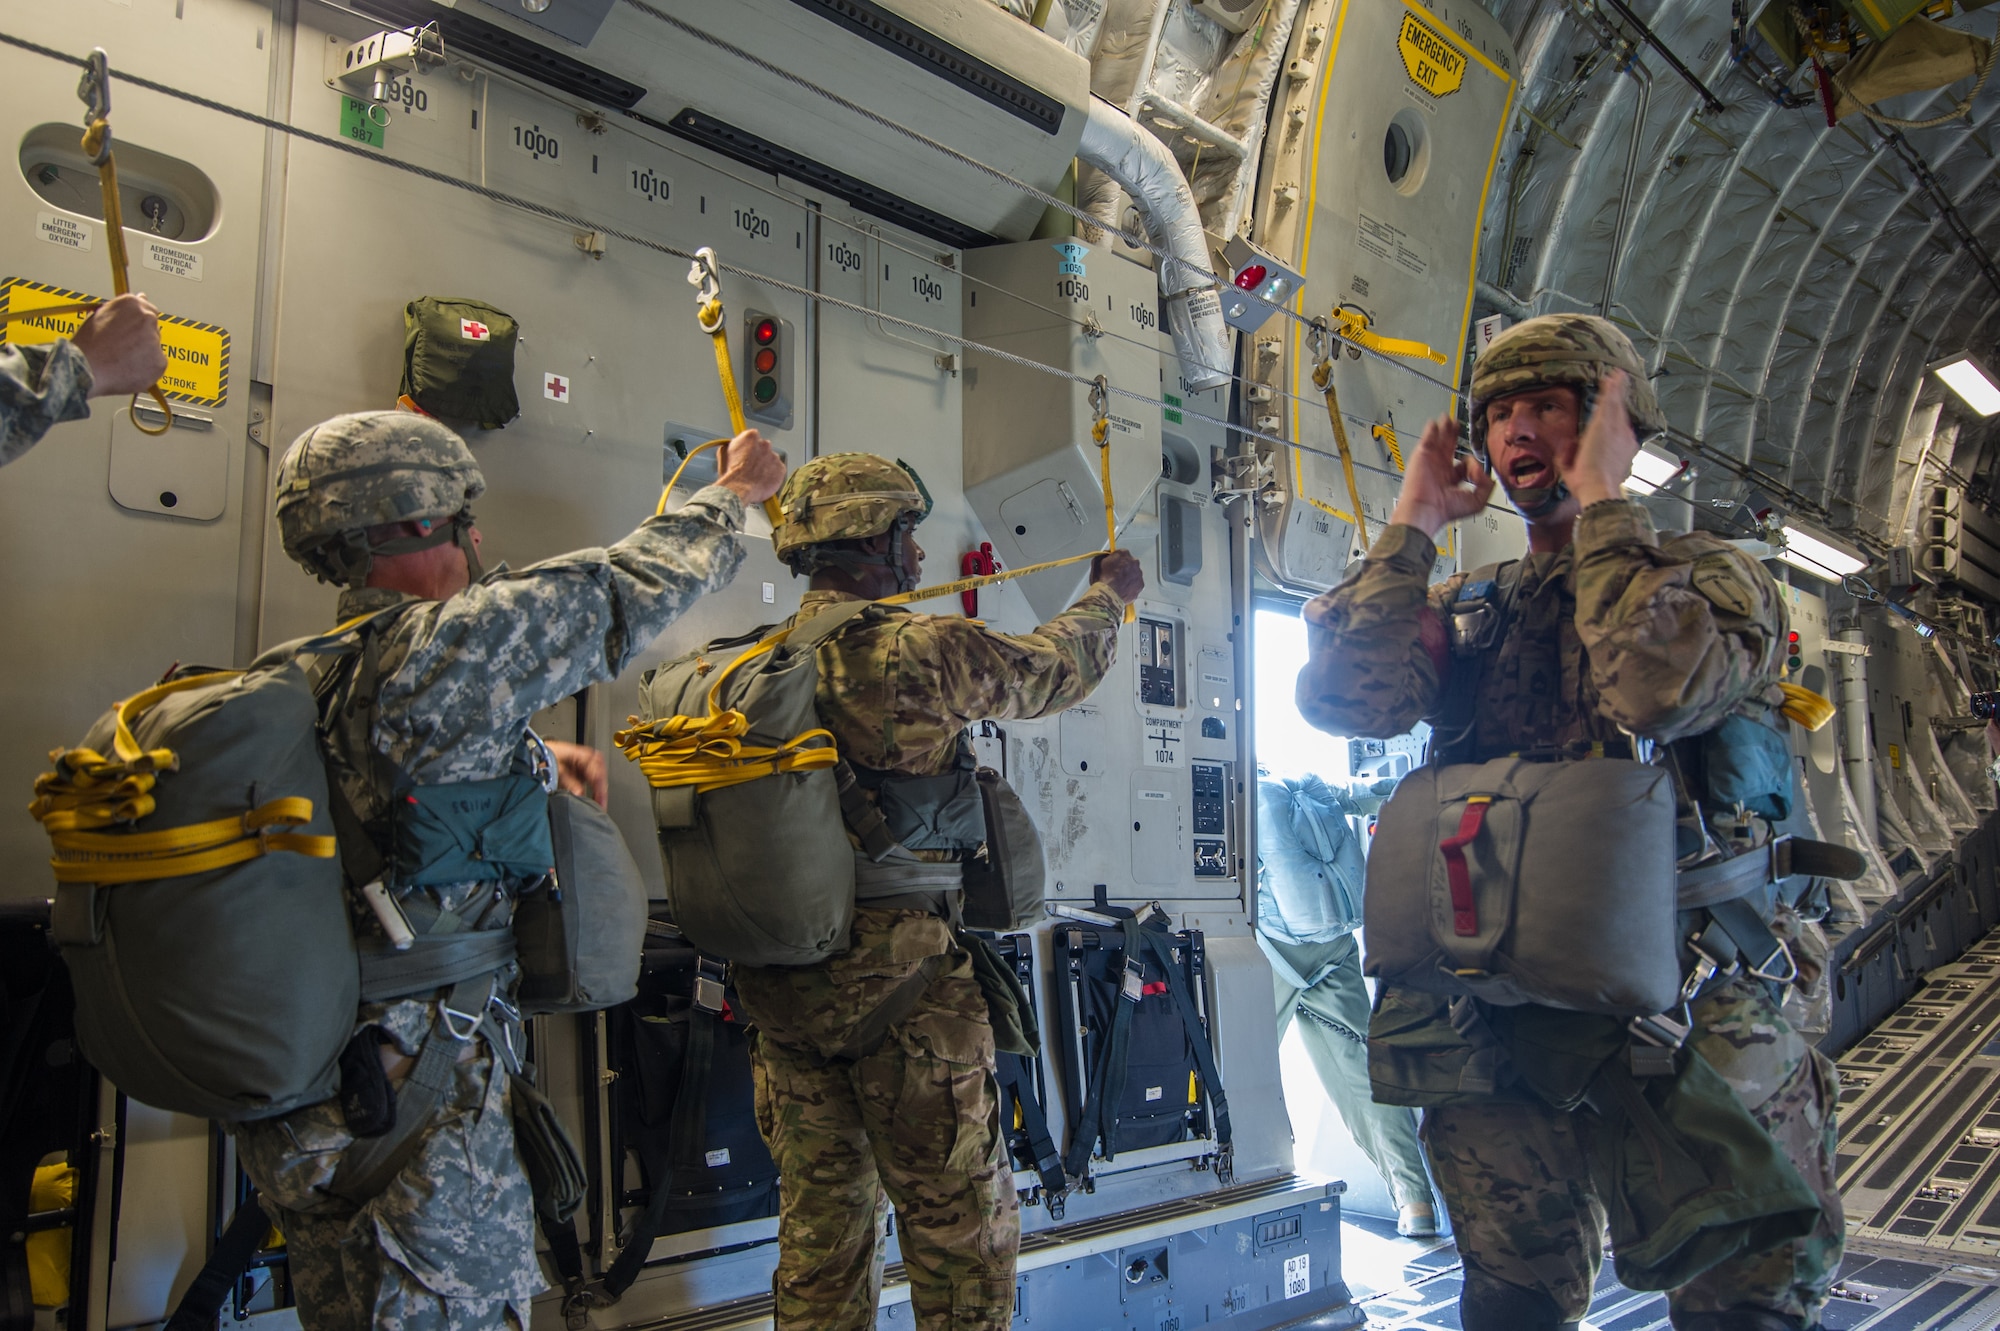 U.S. Army paratroopers listen to their jump master as they prepare to jump out of a C-17 Globemaster III Aug. 15, 2015 during a flight over Lawson Army Airfield, Fort Benning, Ga. Reserve aircrews from the 701st and 300th Airlift Squadron out of Joint Base Charleston, S.C. flew two C-17s during Fort Benning’s celebration of the 75th anniversary of the U.S. Army Airborne School. Almost 300 paratroopers took the big leap in the day’s event. (U.S. Air Force photo by Staff Sgt. Bobby Pilch)